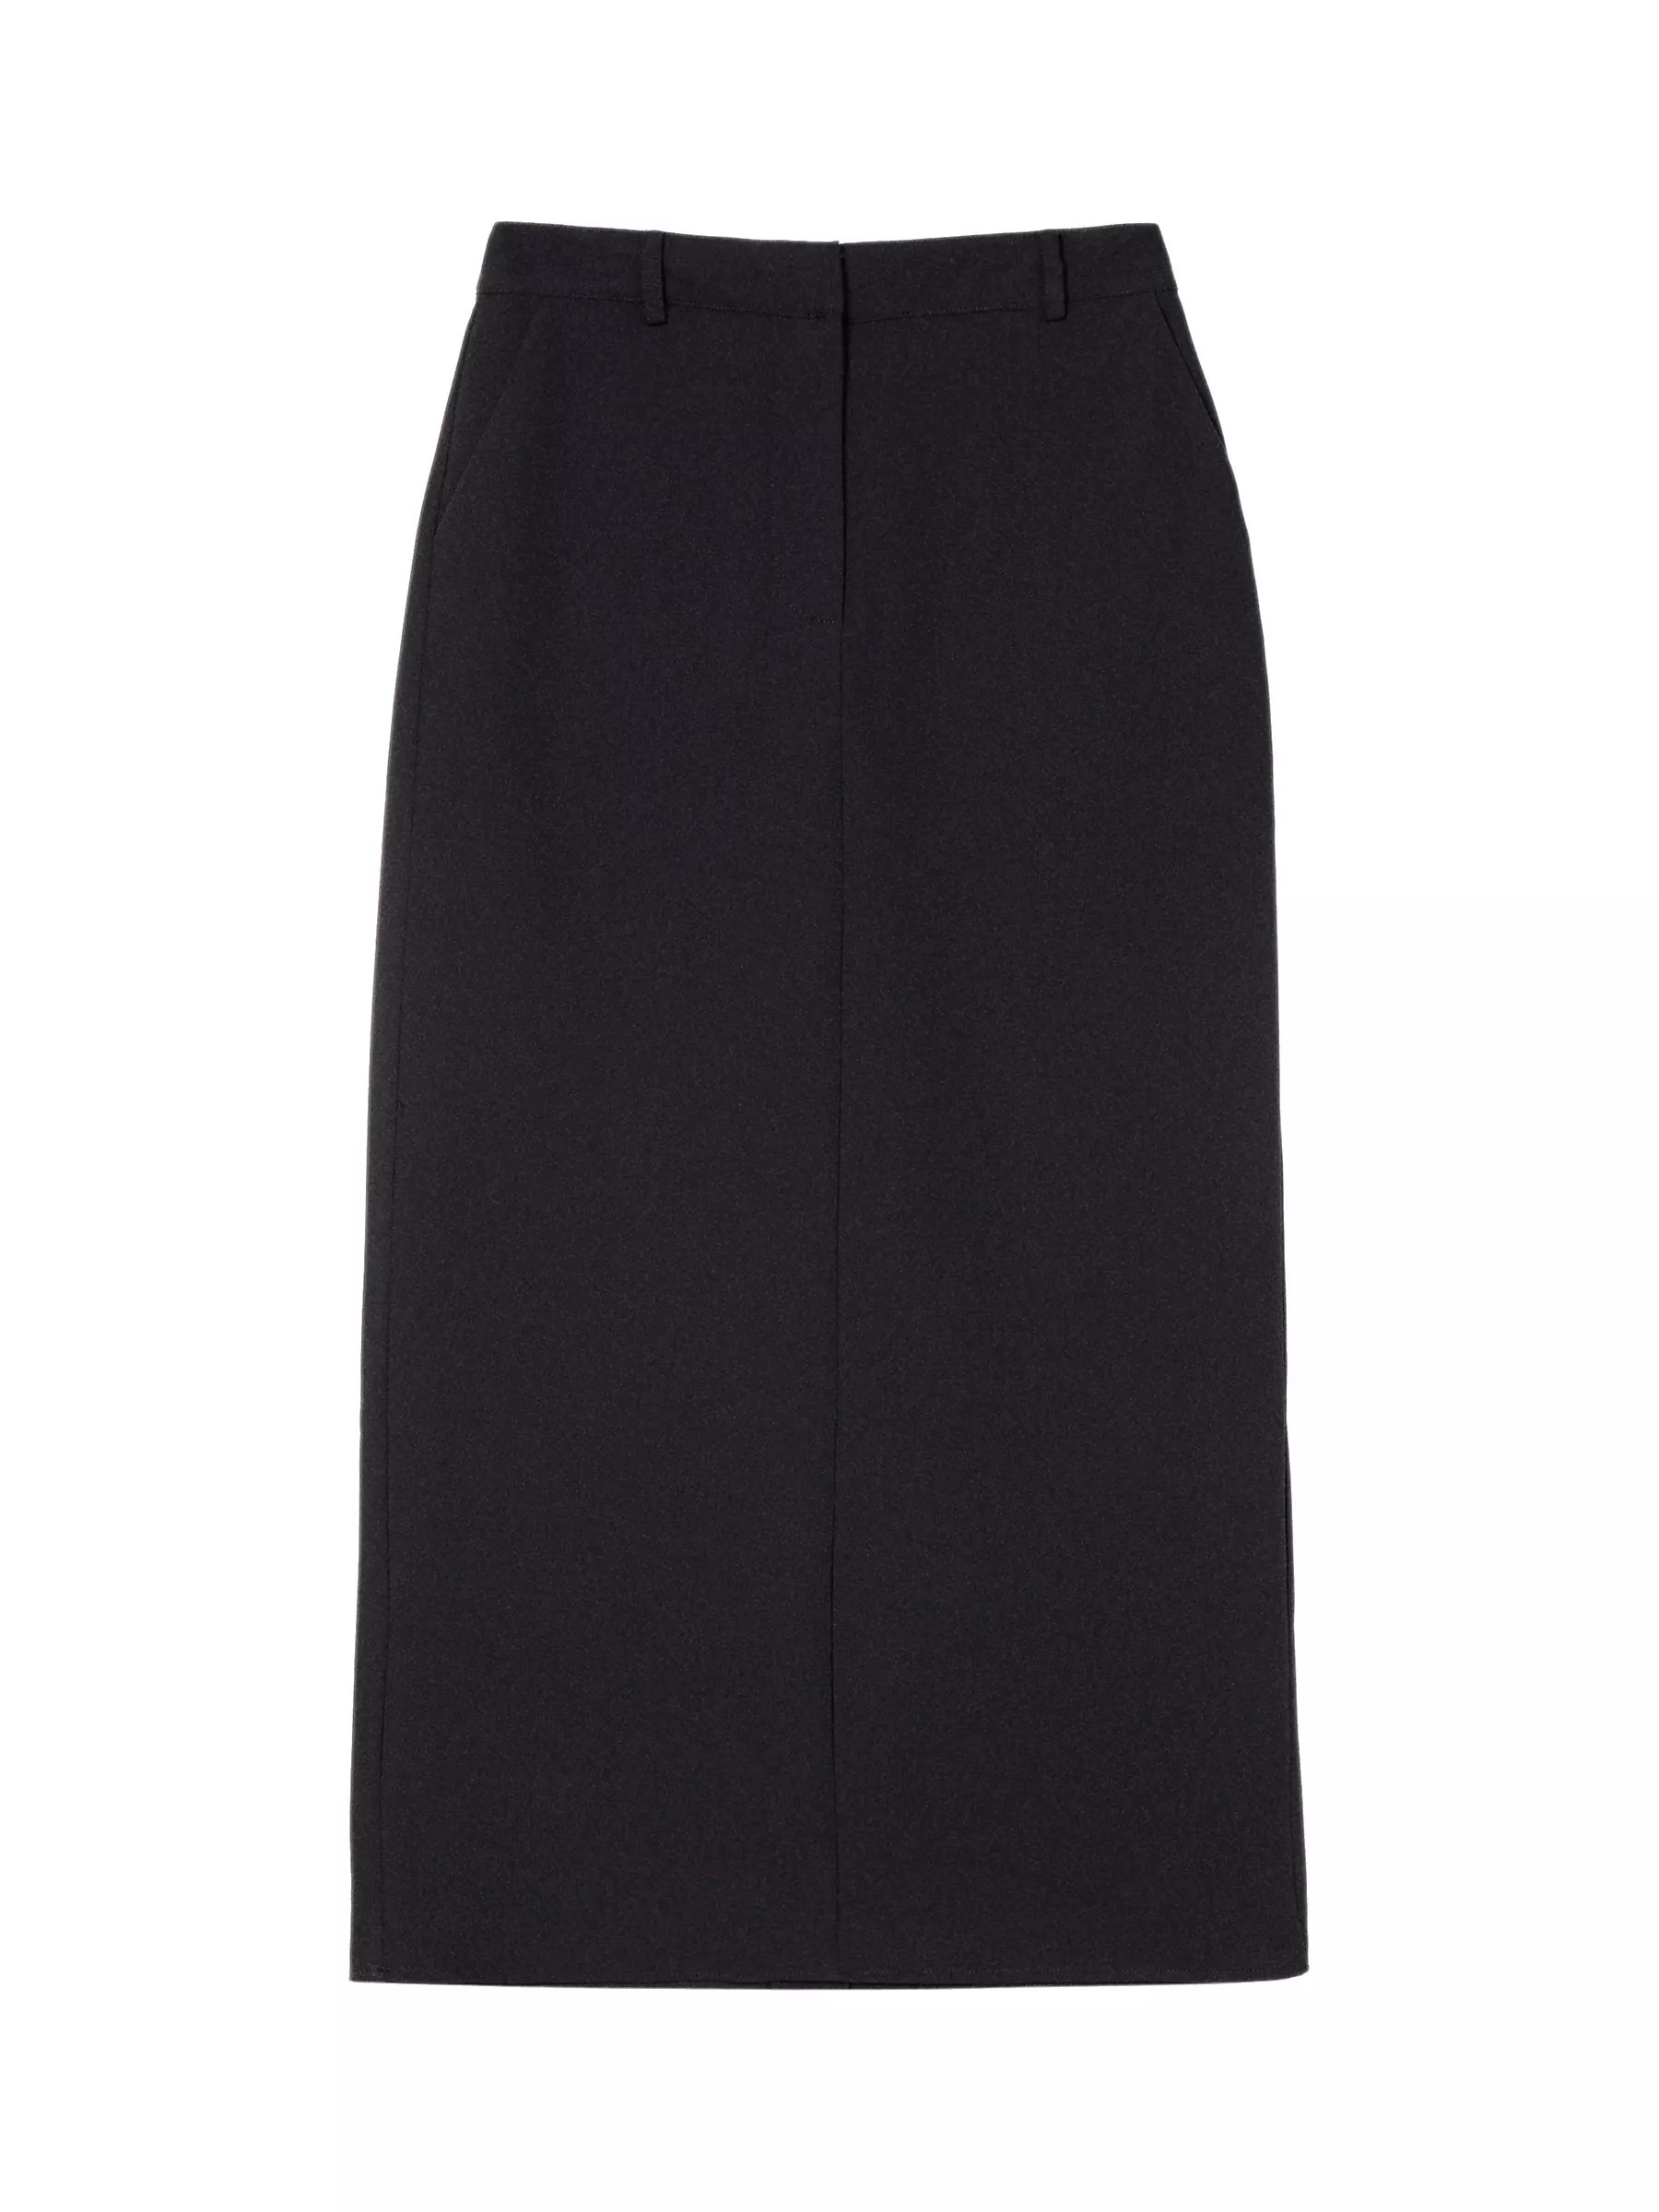 Why The Pencil Skirt Trend is About to Go Viral (Again) | Who What Wear UK